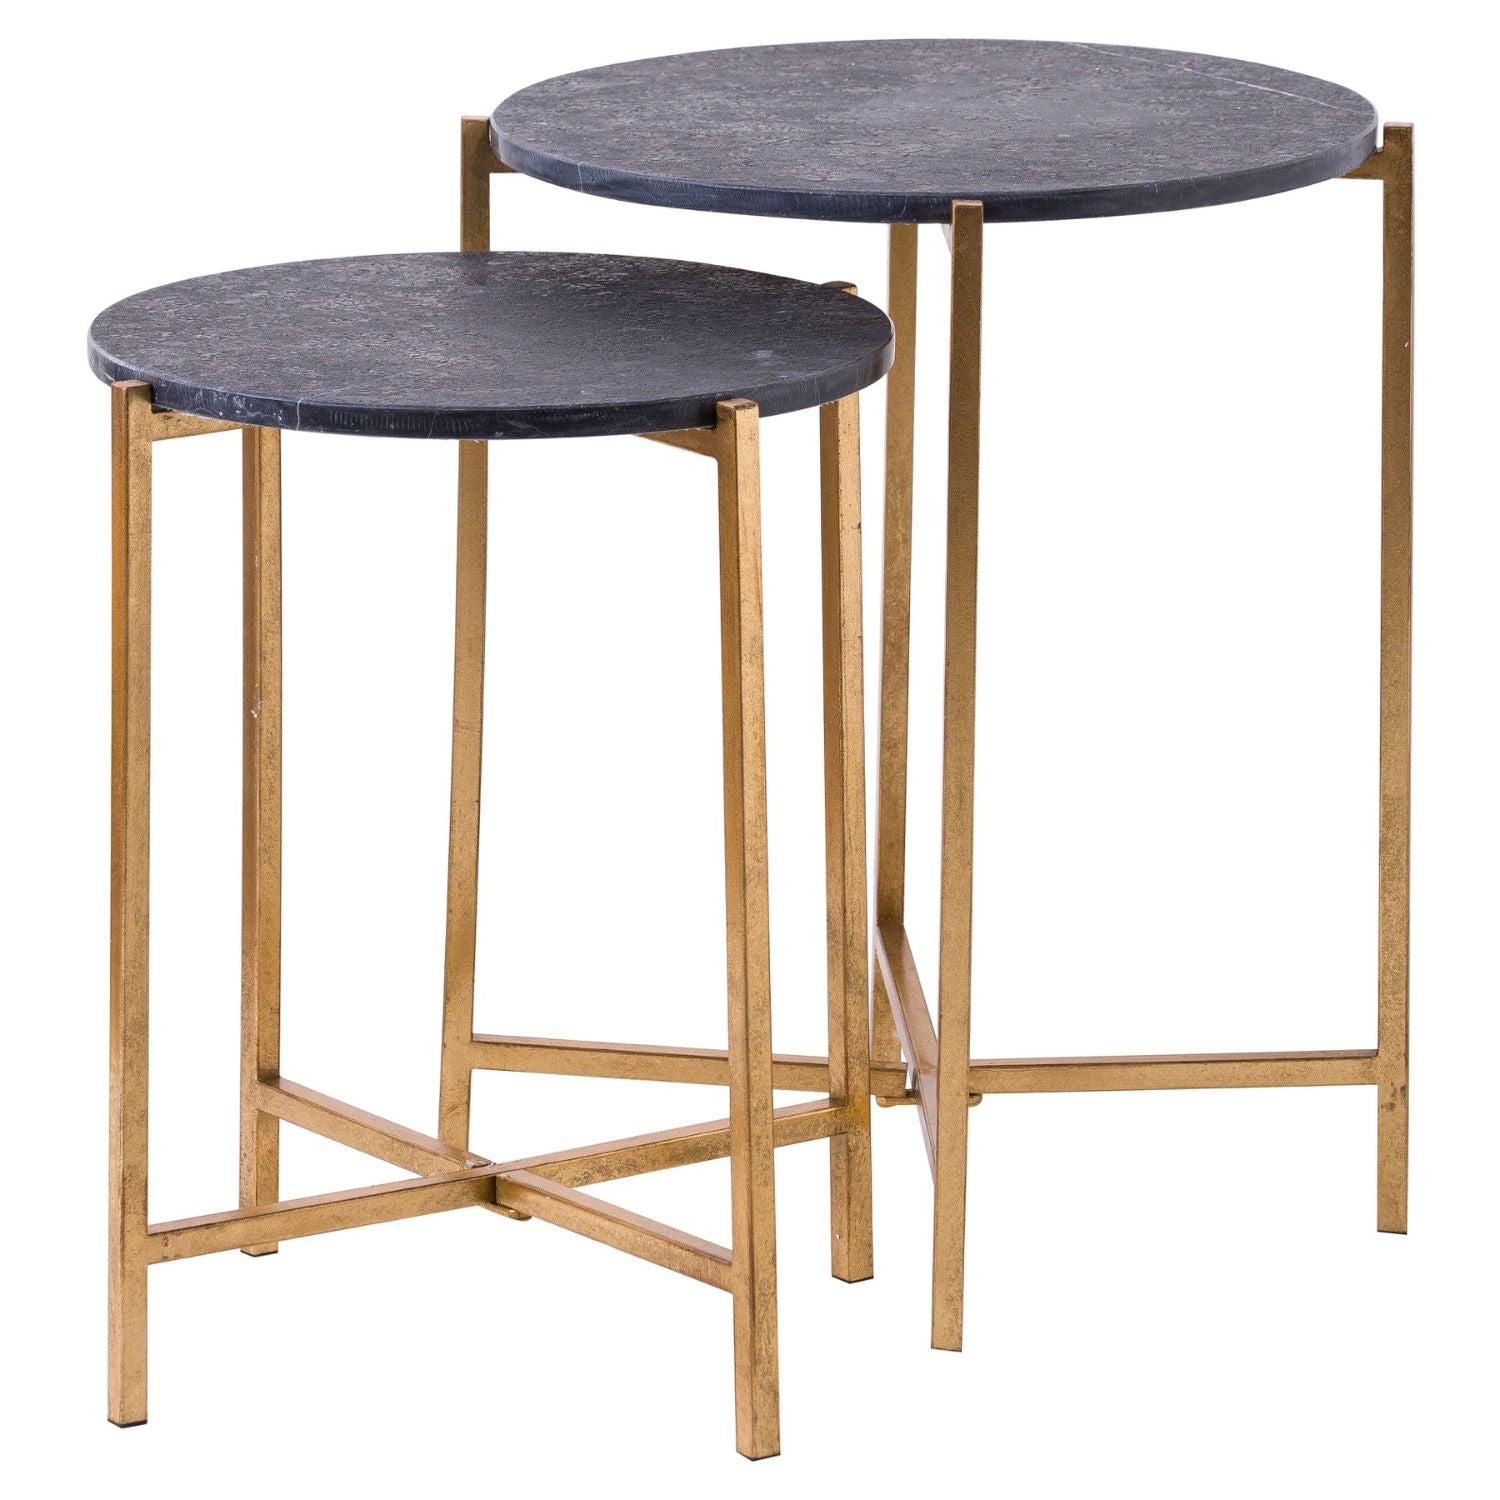 Two Black Marble and gold side tables